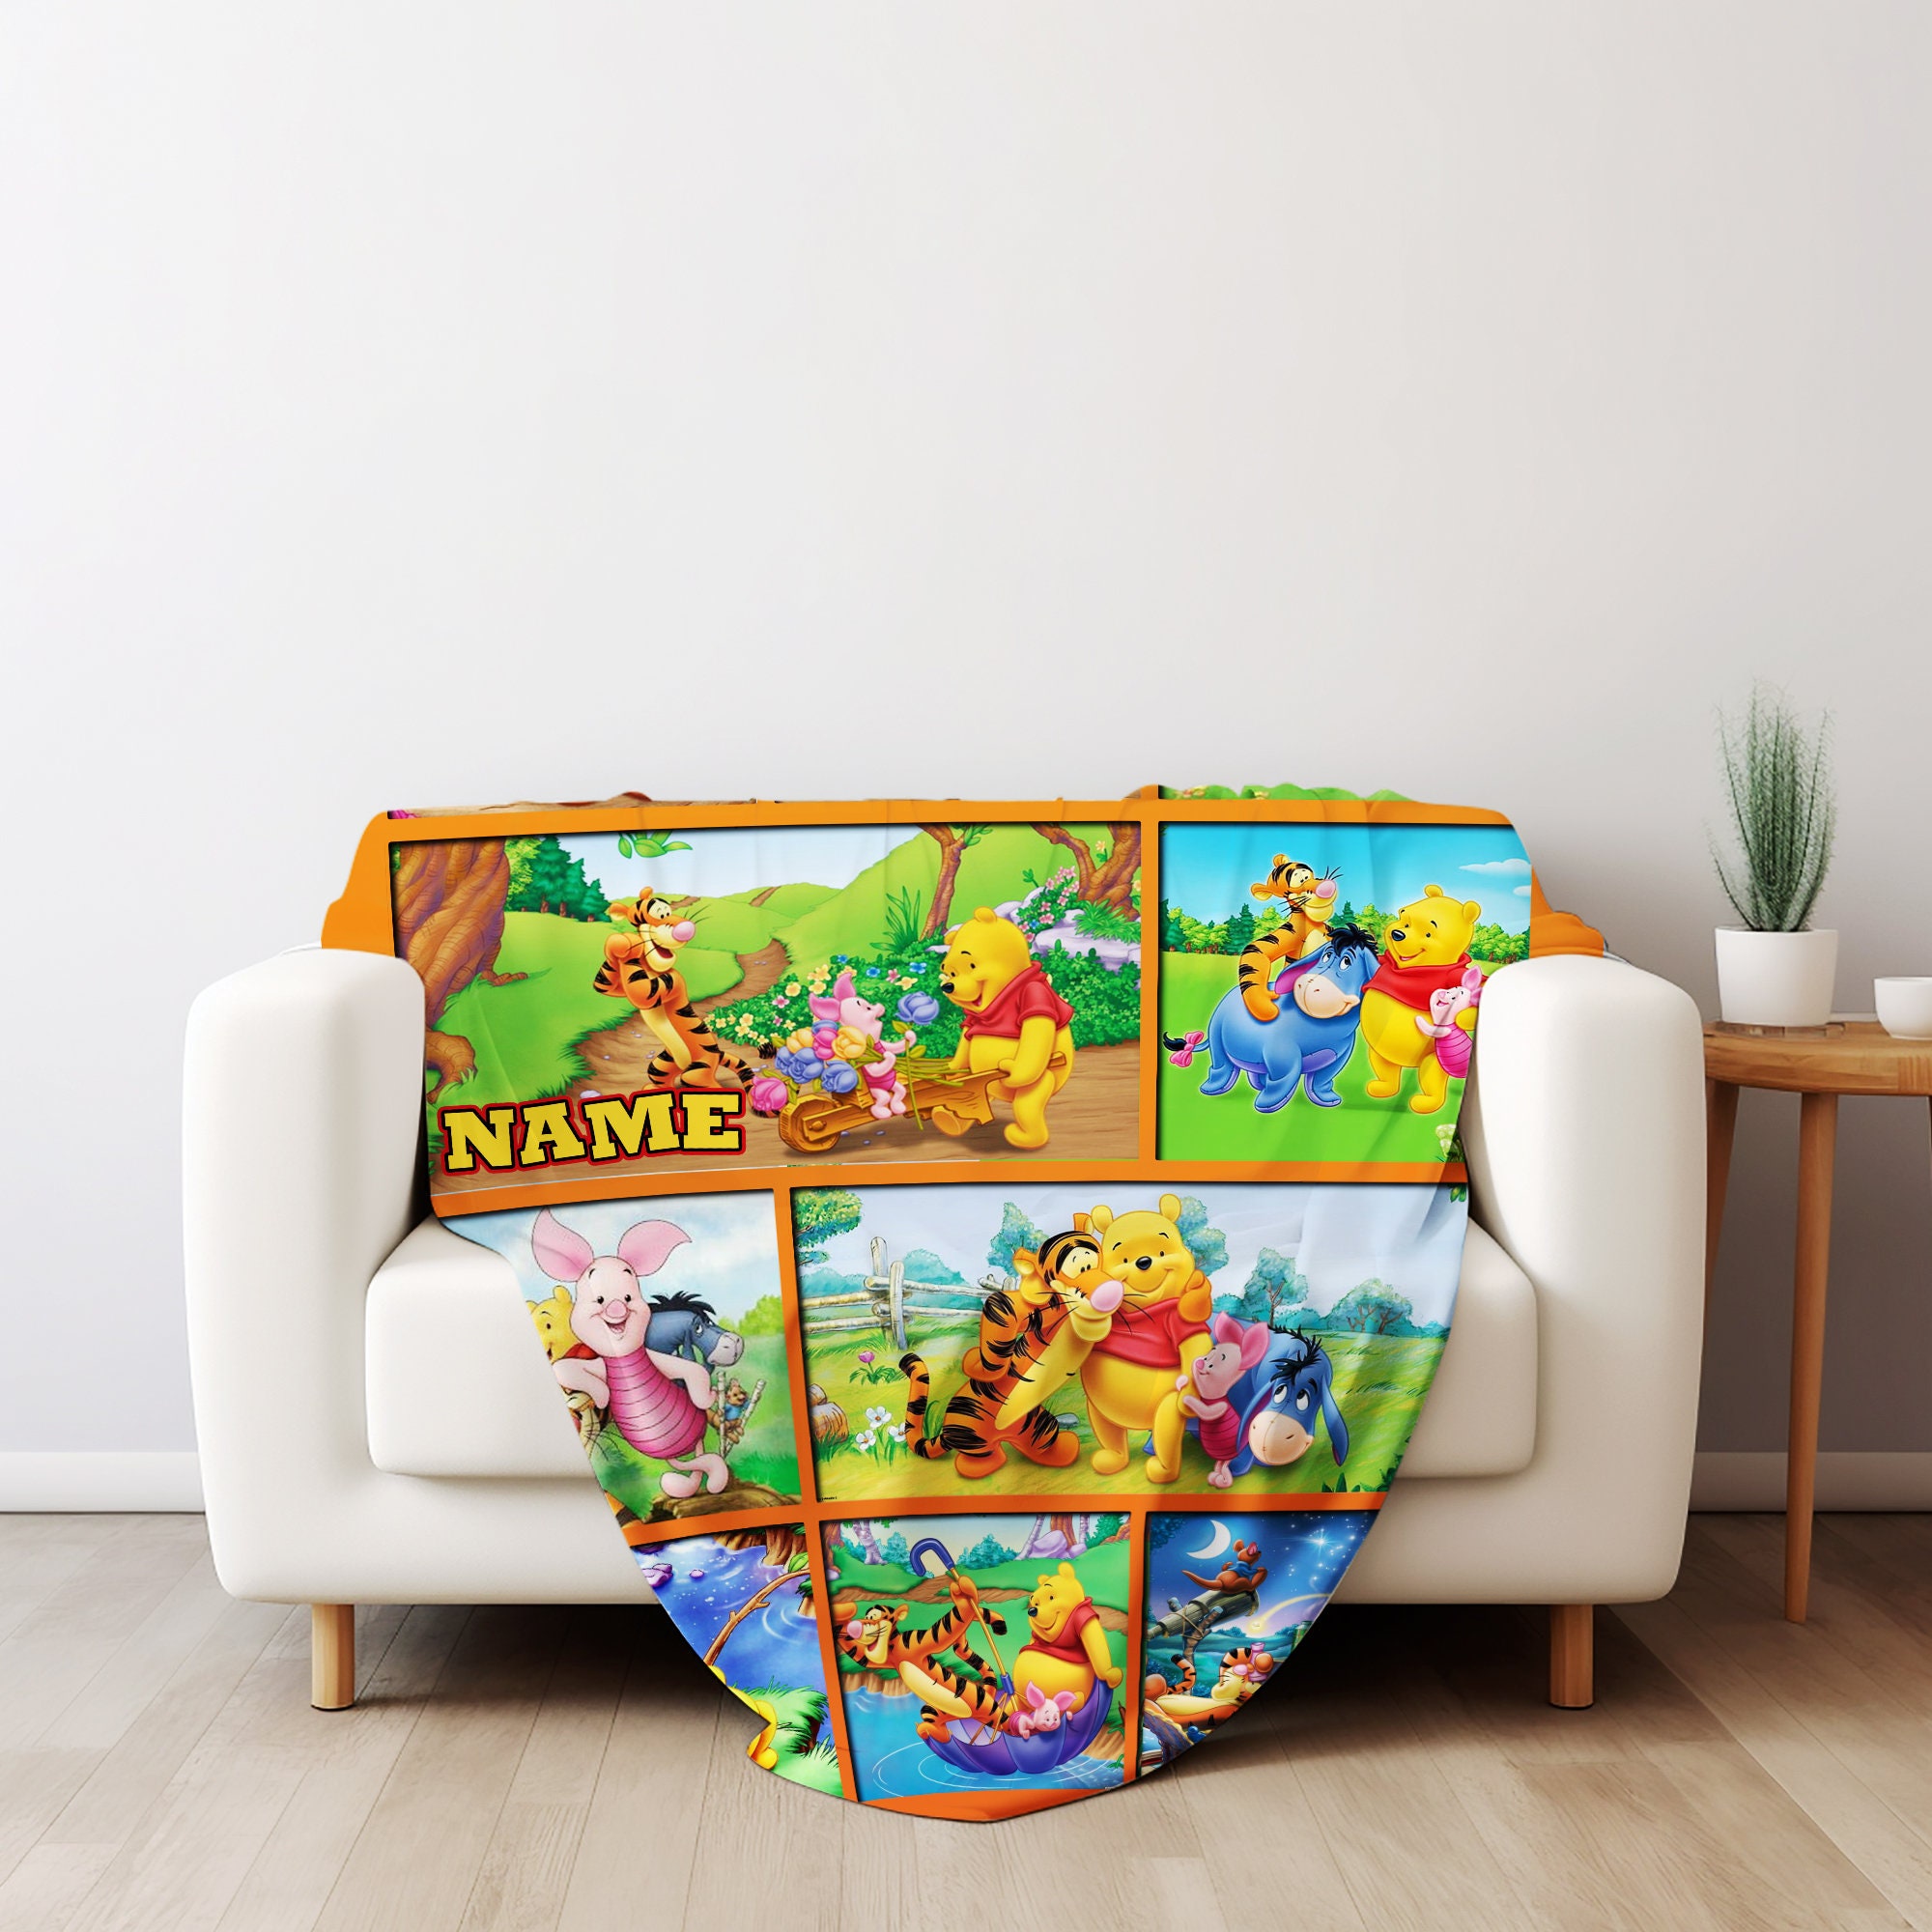 Personalized Name Blanket, Personalized Classic Winnie the Pooh Blanket